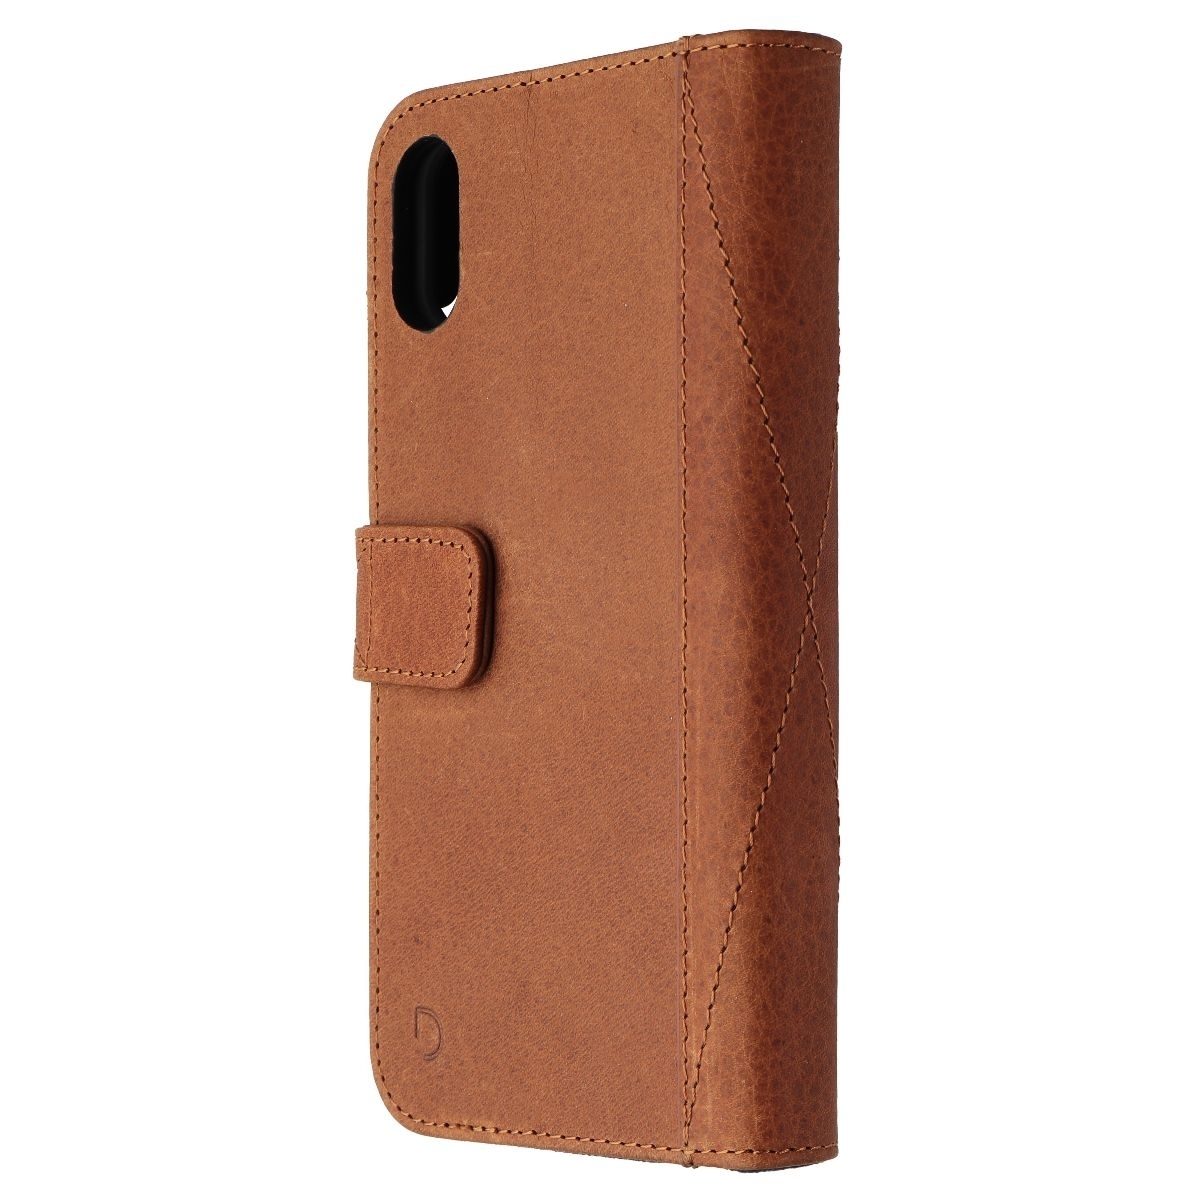 DECODED Full Grain Leather Folio + Case For Apple IPhone XR - Cinnamon Brown (Refurbished)